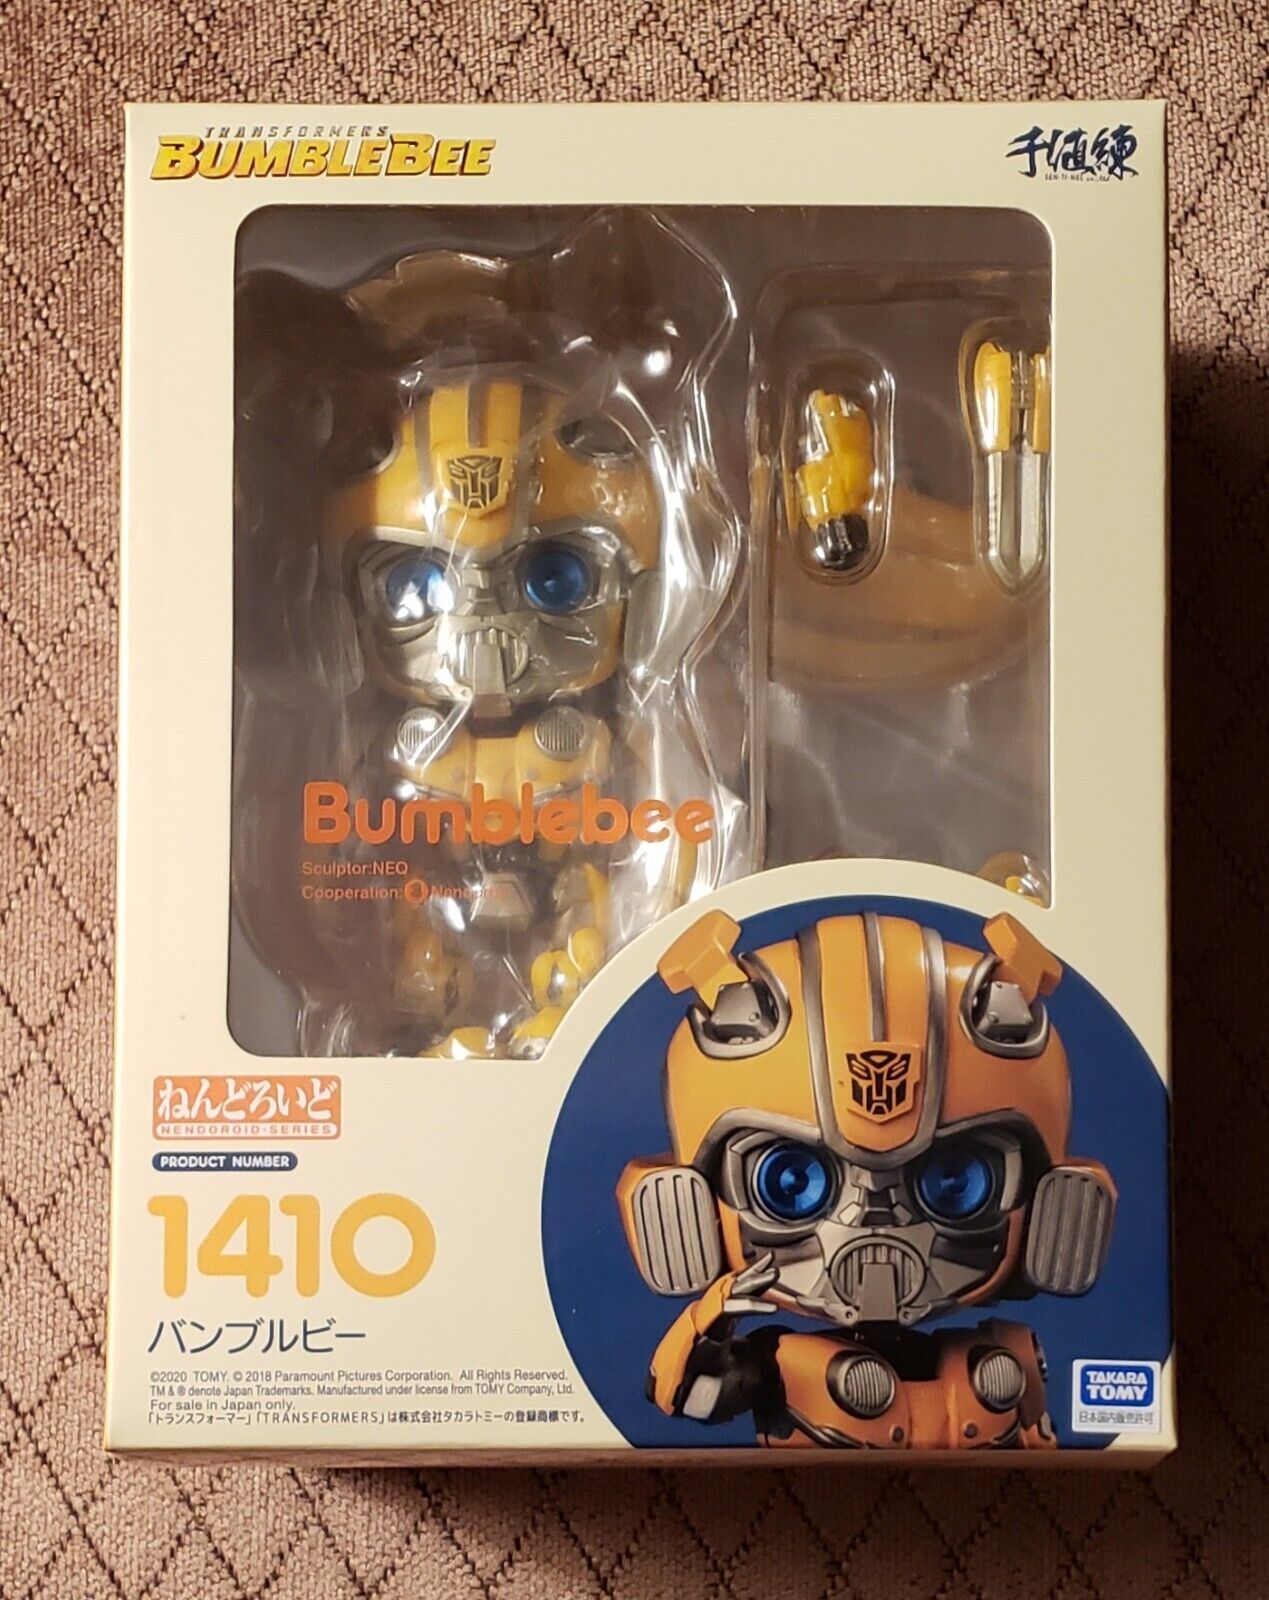 NEW Movie Transformers Bumblebee Nendoroid Figure by Good Smile Company